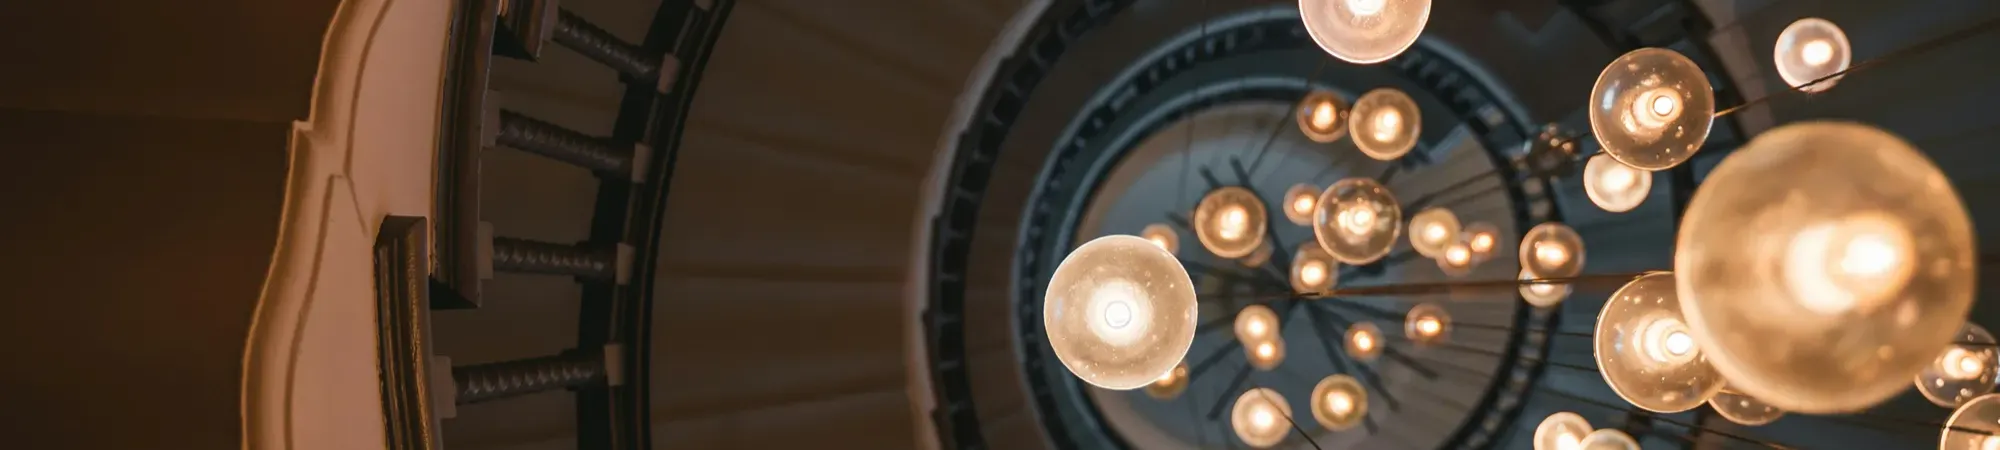 Spiral Stair Case with Lights